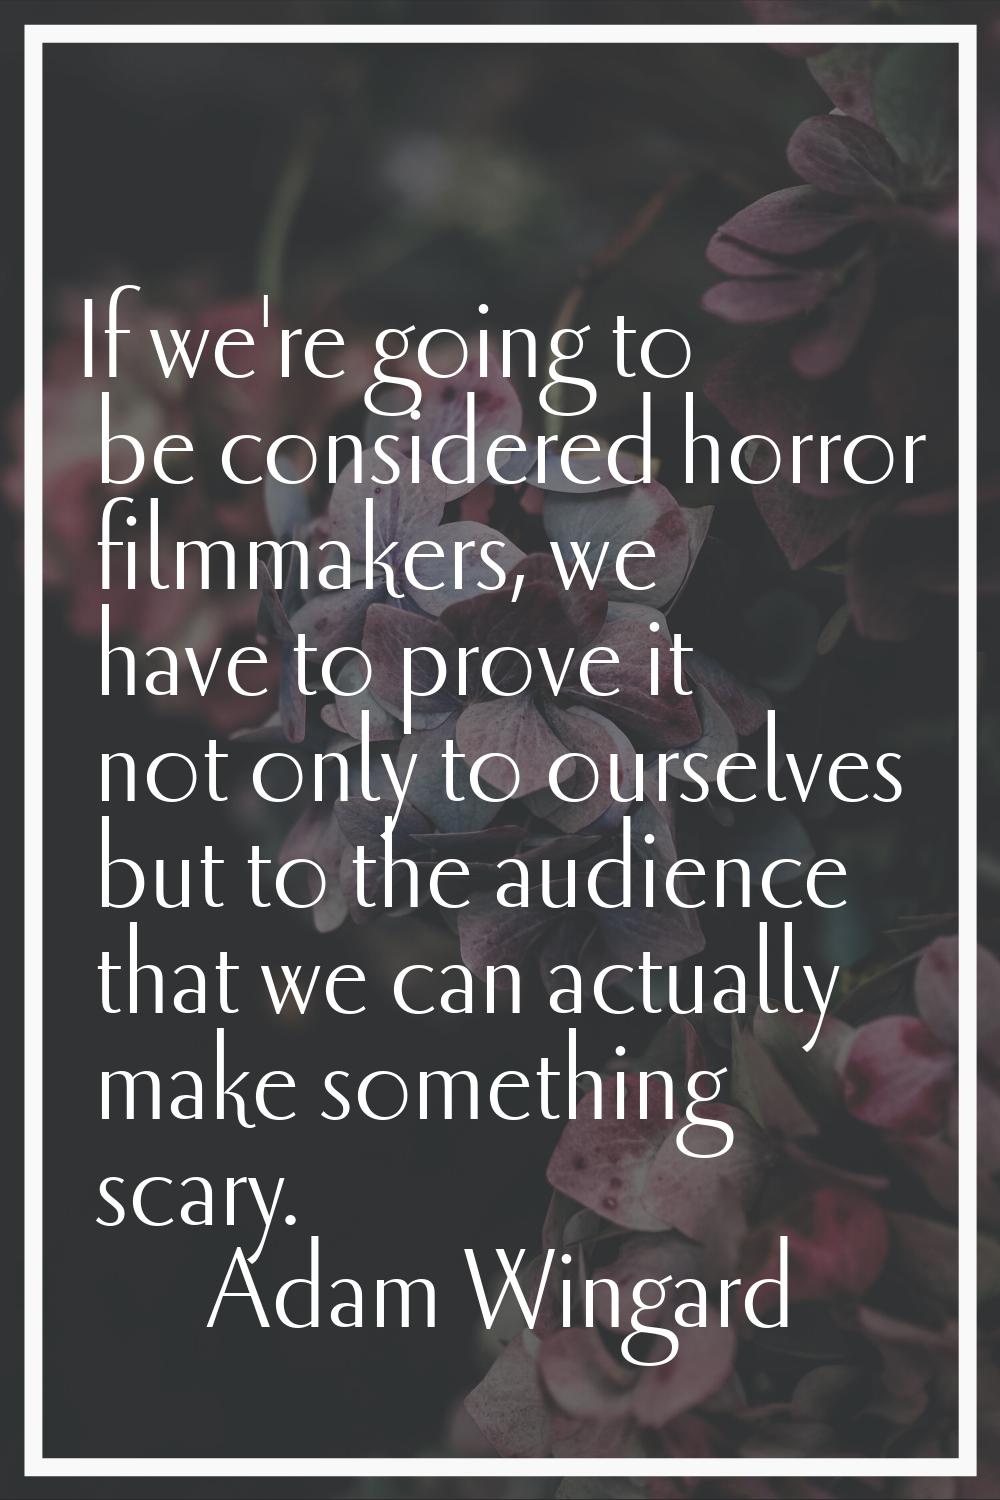 If we're going to be considered horror filmmakers, we have to prove it not only to ourselves but to